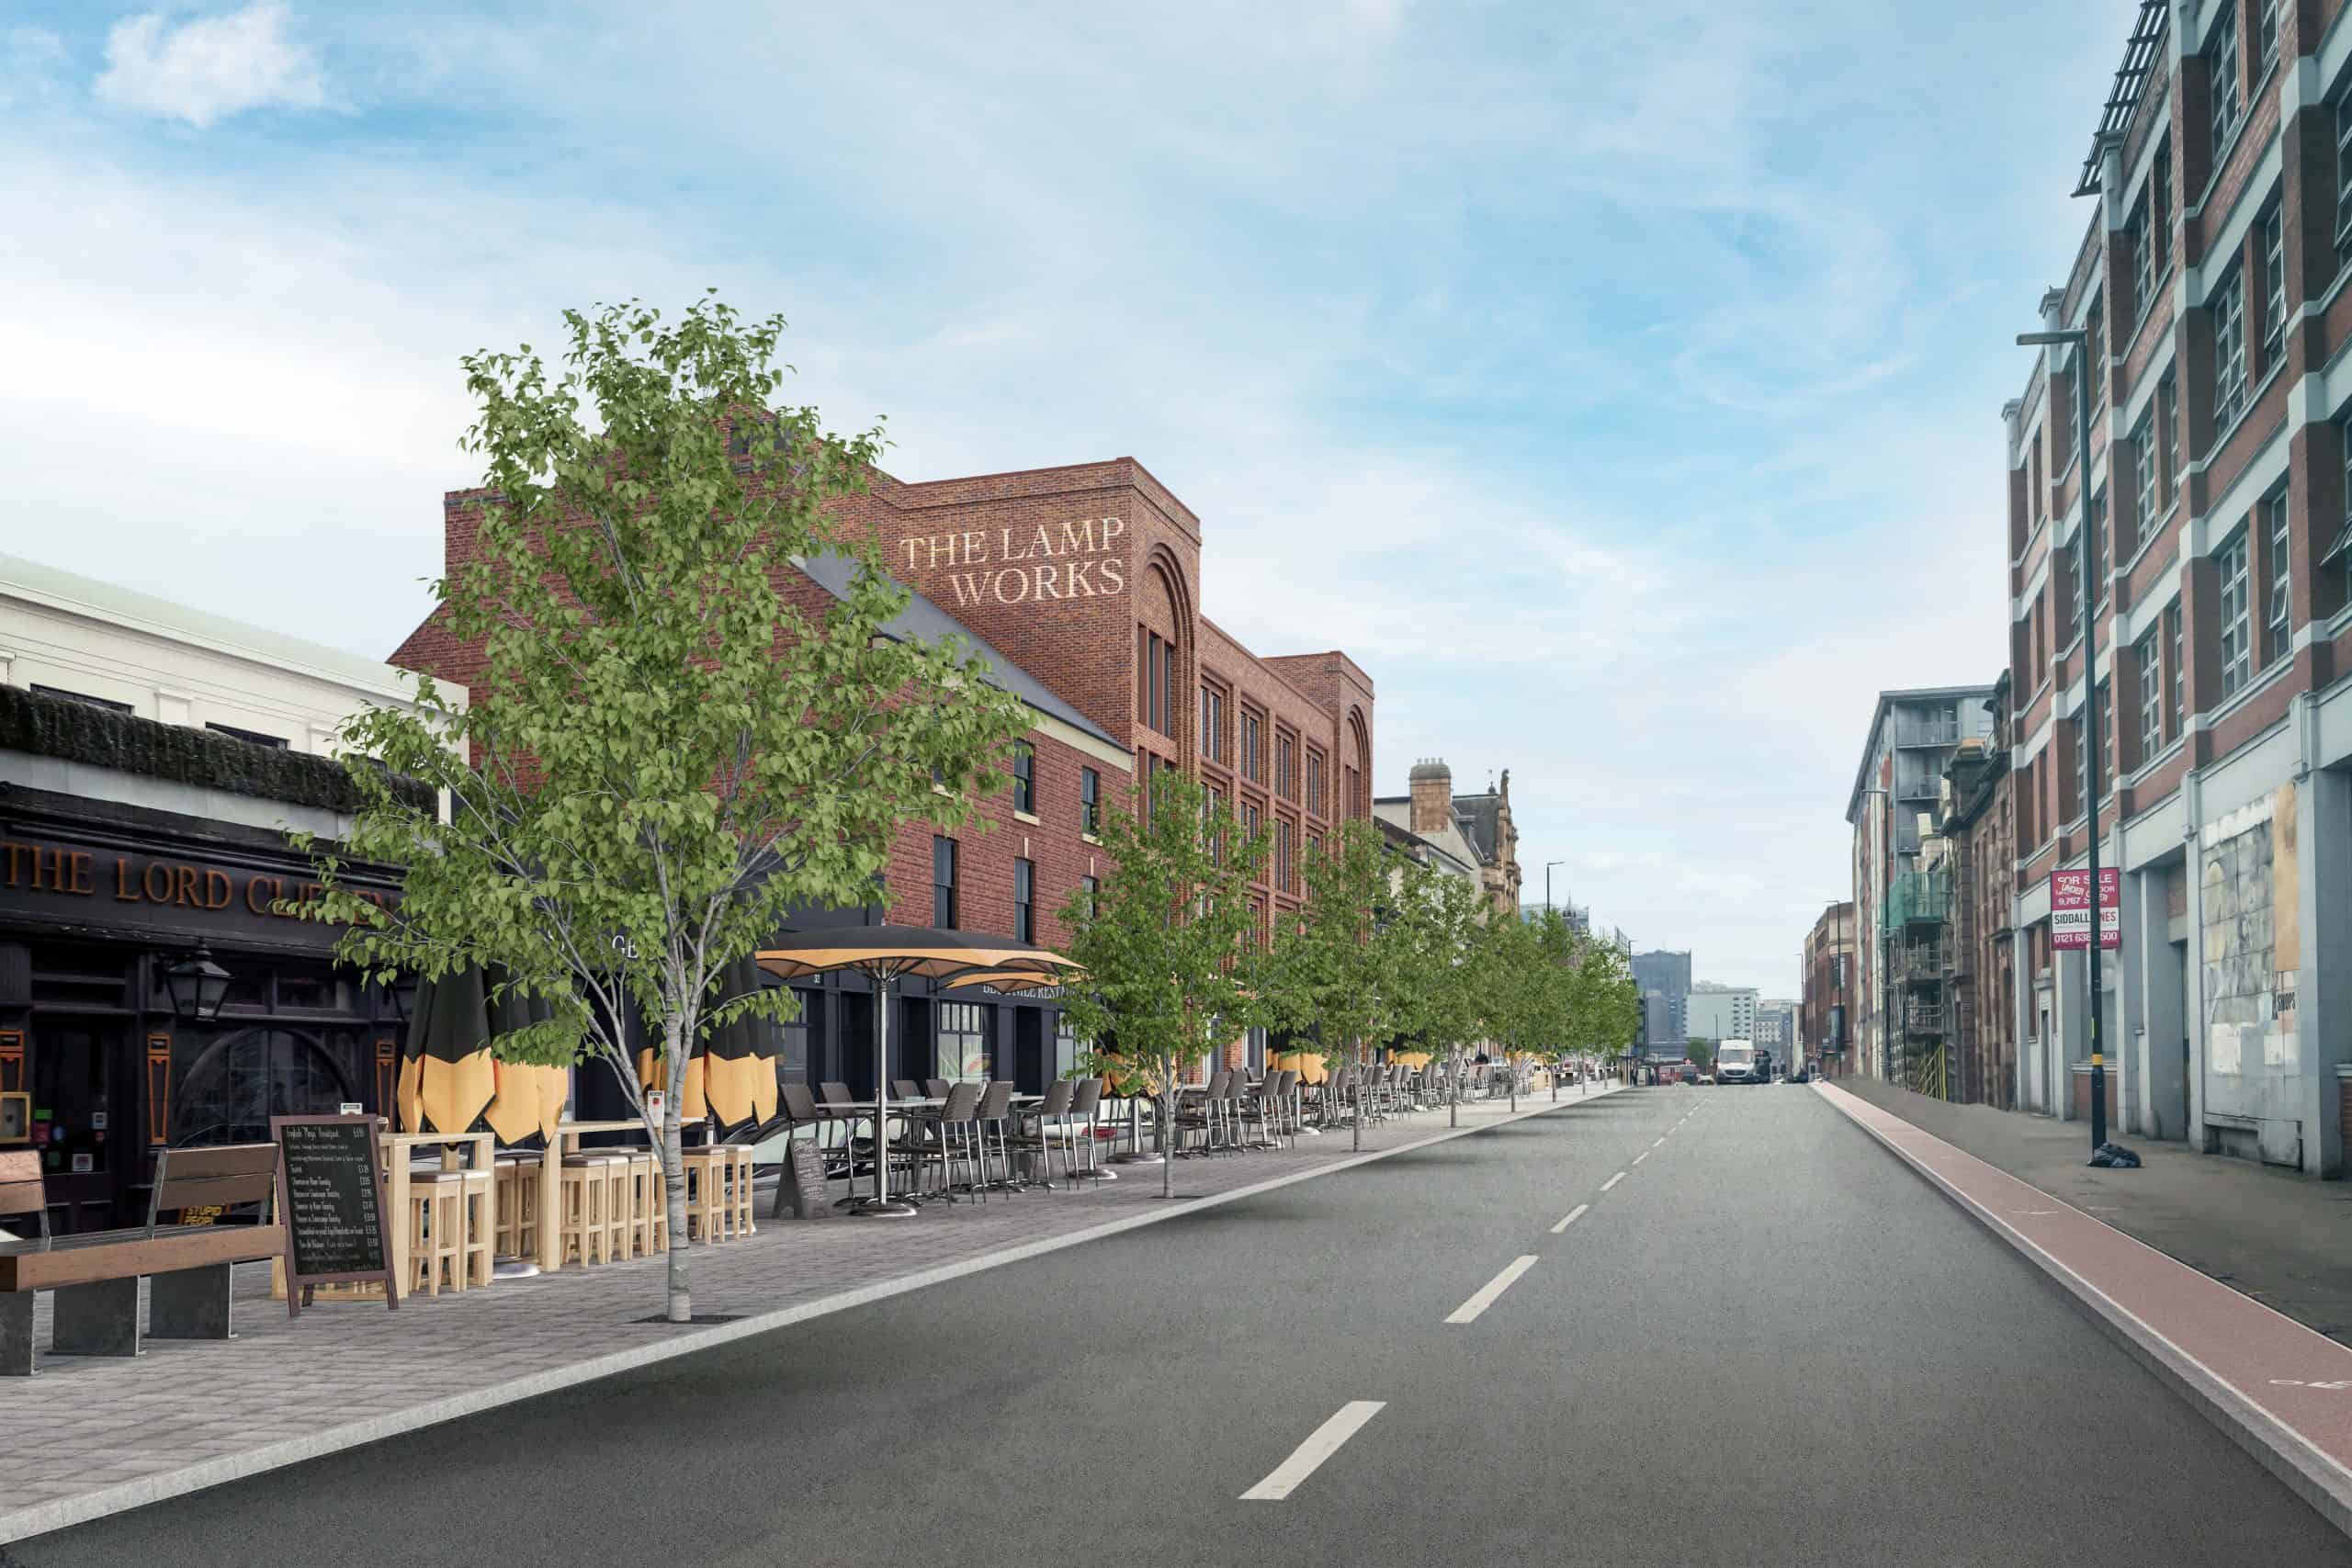 CGI showing how the narrowing of Great Hamption Street will benefit the community with outdoor seating and trees